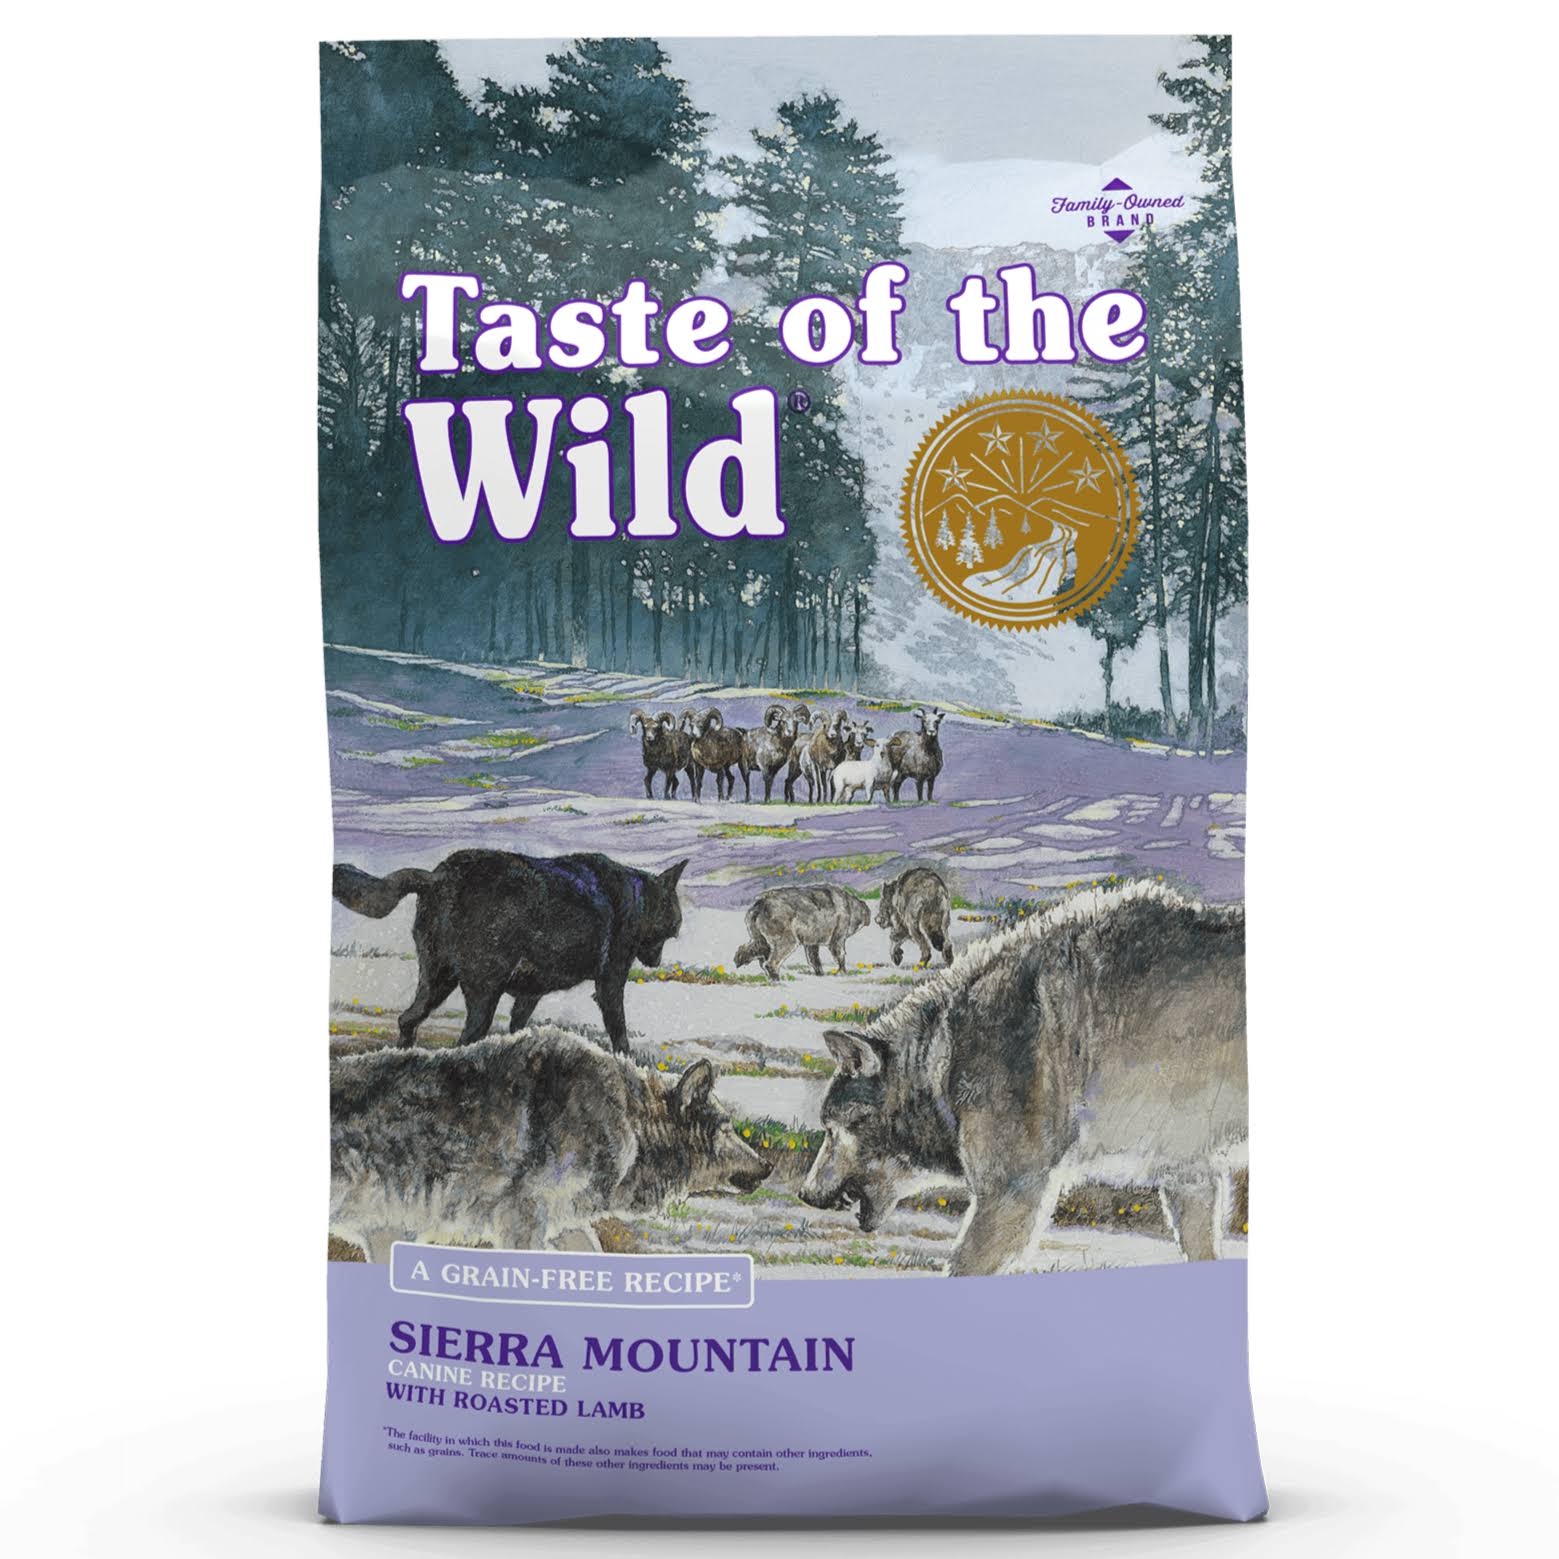 Taste of the Wild Sierra Mountain with Roasted Lamb Dog Food [14lb]